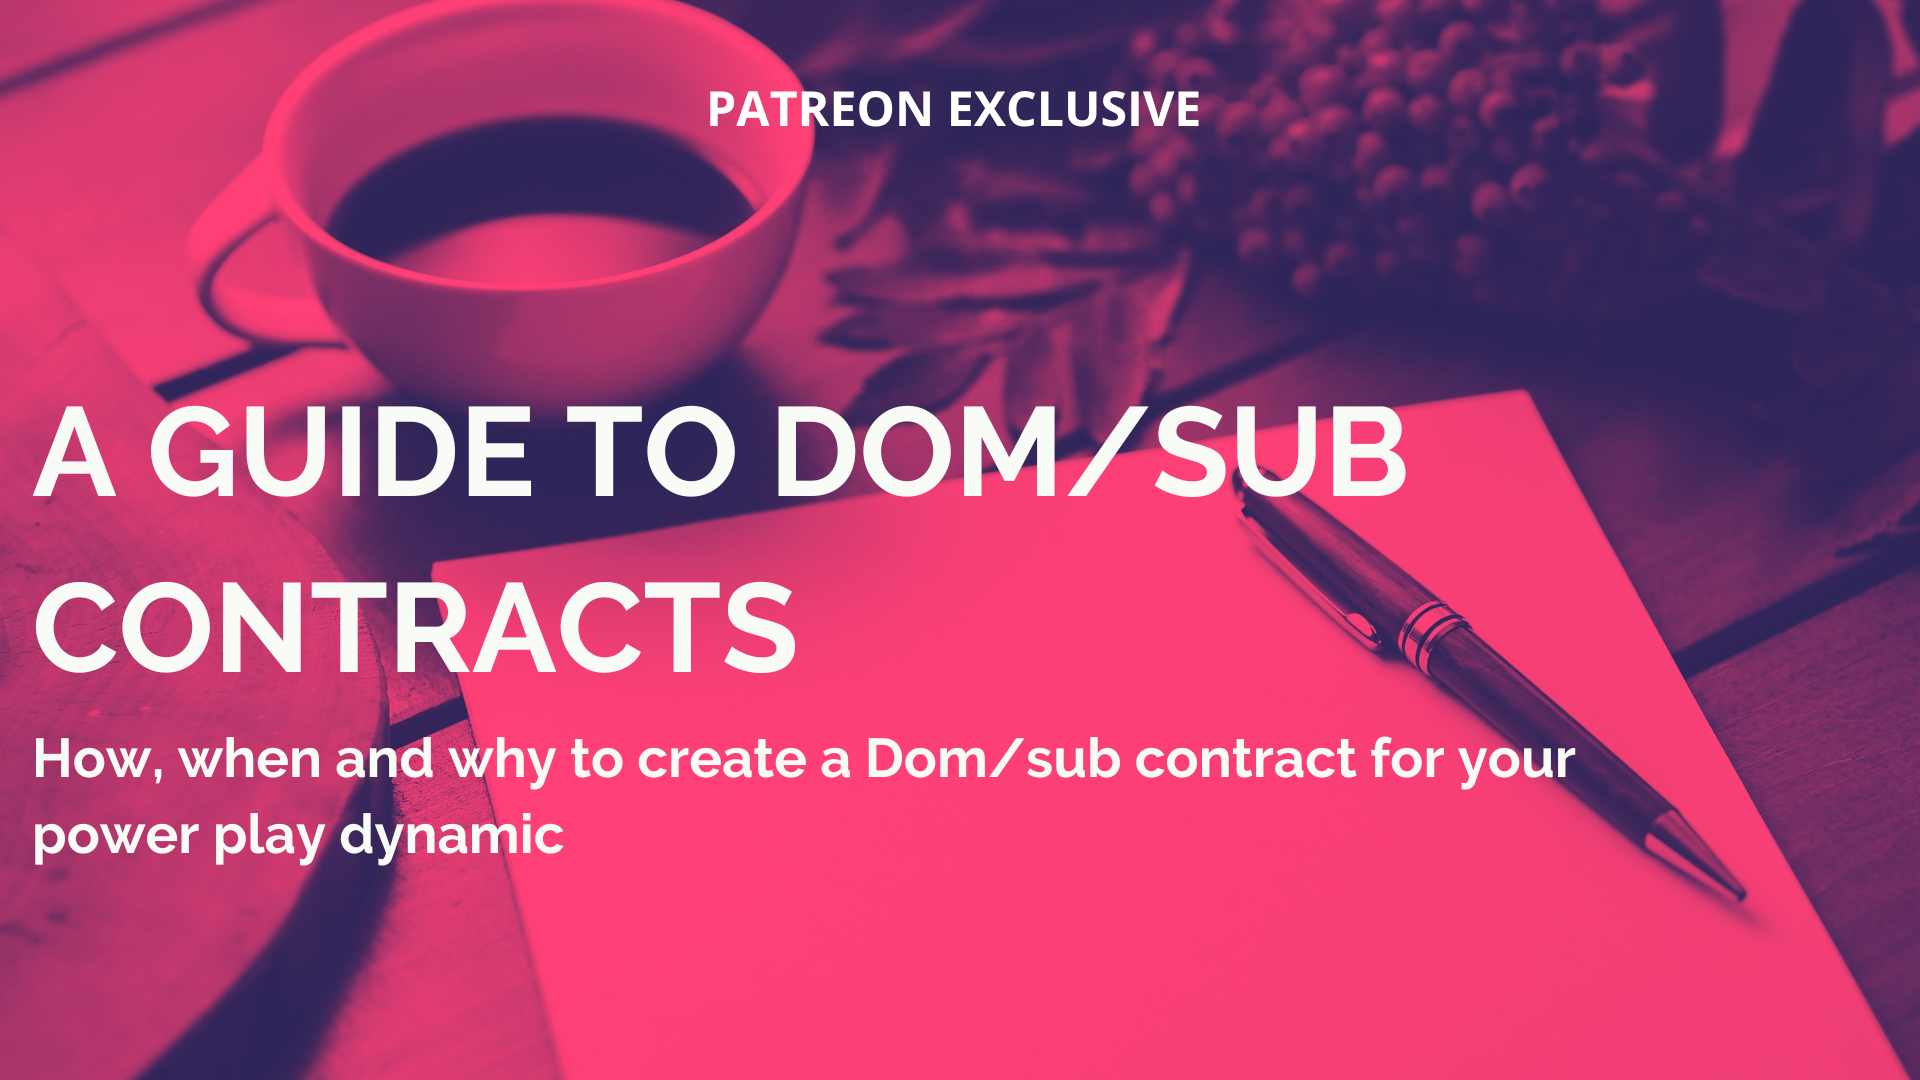 A Guide to Dom/sub contracts